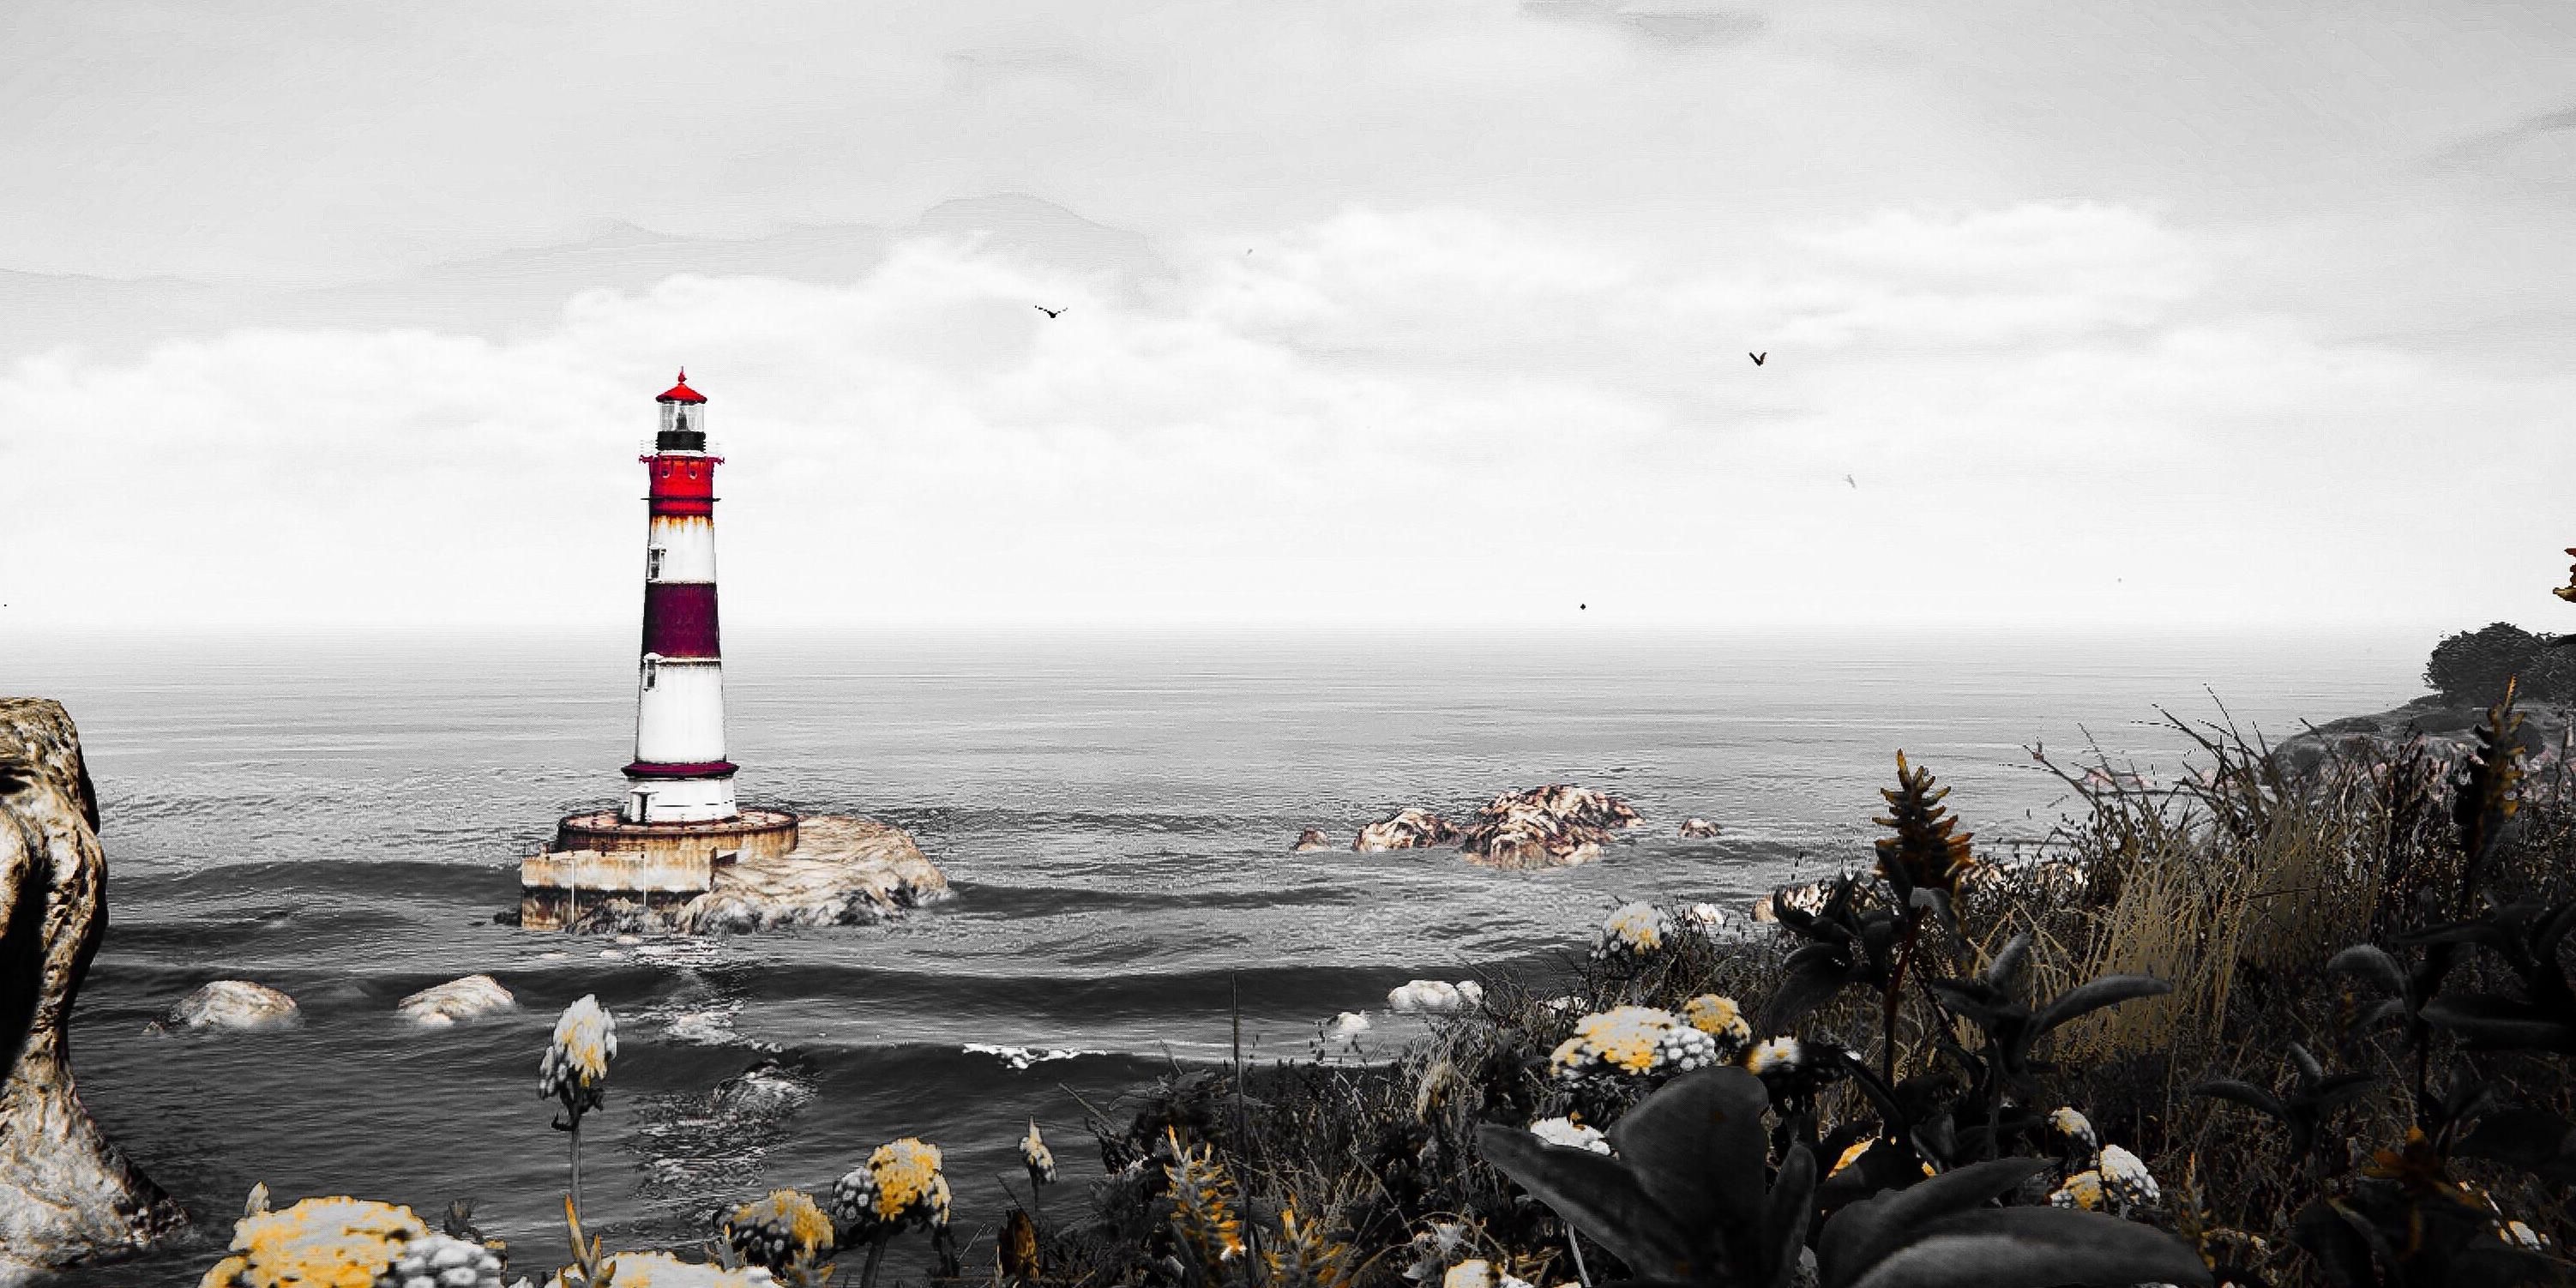 The El Gordo Lighthouse in Grand Theft Auto V